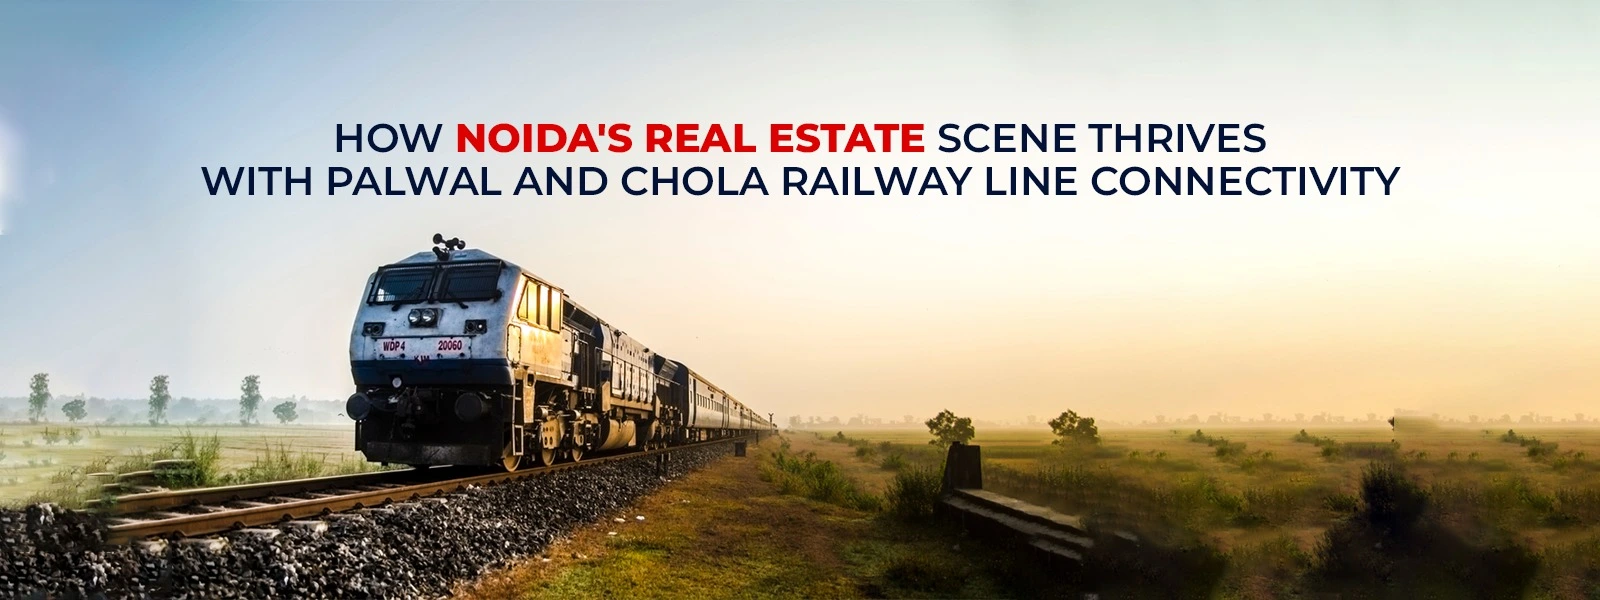 How Noida's Real Estate Scene Thrives with Palwal and Chola Railway line Connectivity